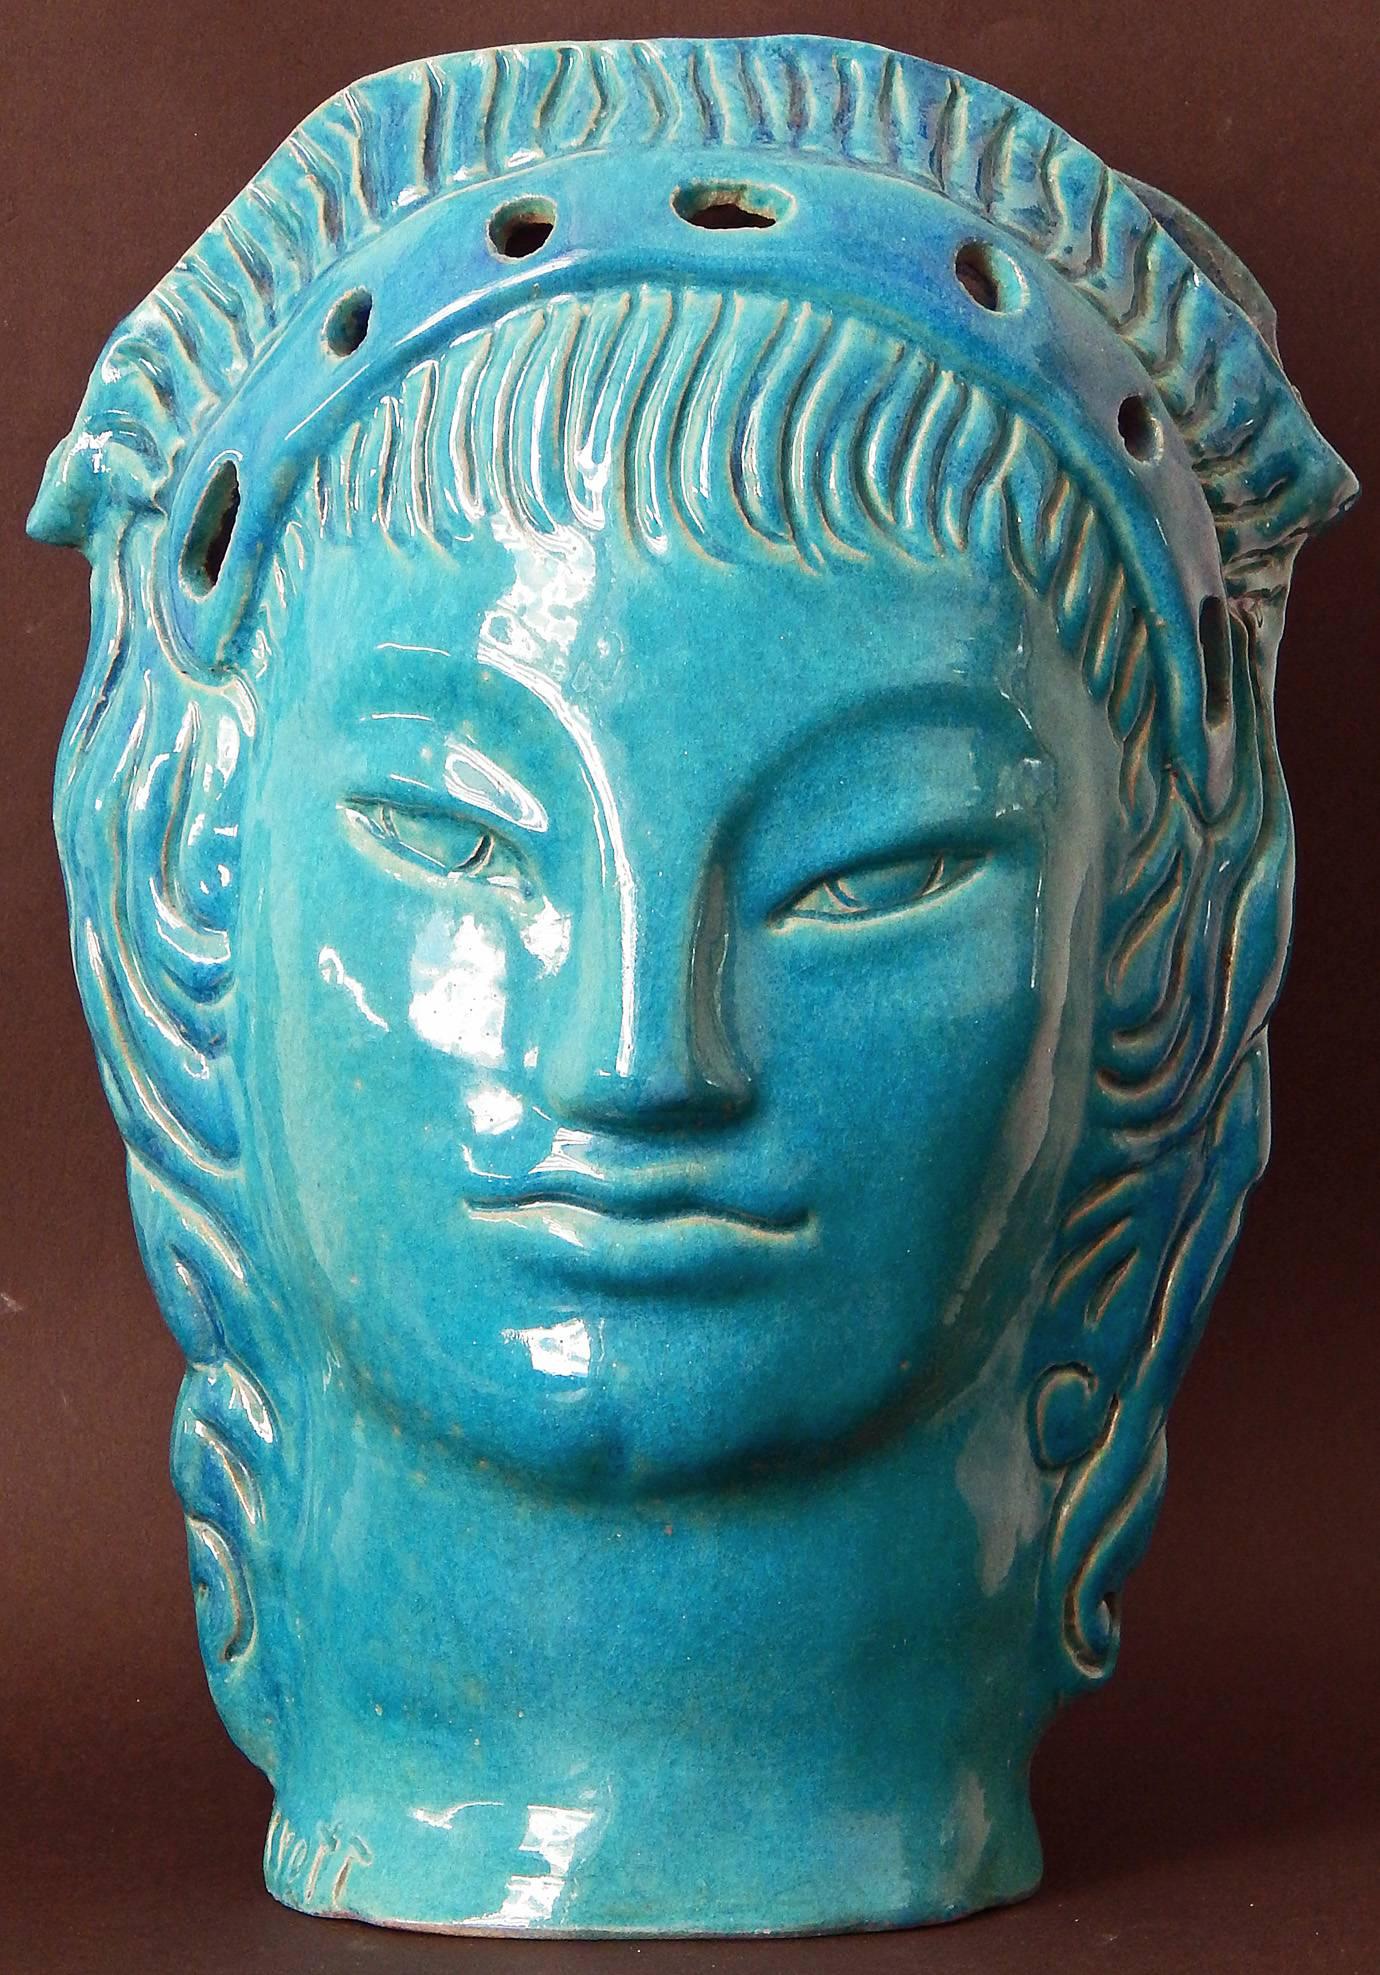 Bathed in a lovely Mediterranean blue glaze, and featuring two sculpted female heads on either side, this striking Art Deco vase was made by Edith Varian Cockcroft, a New York artist who studied with Henri Matisse. Cockcroft spent considerable time